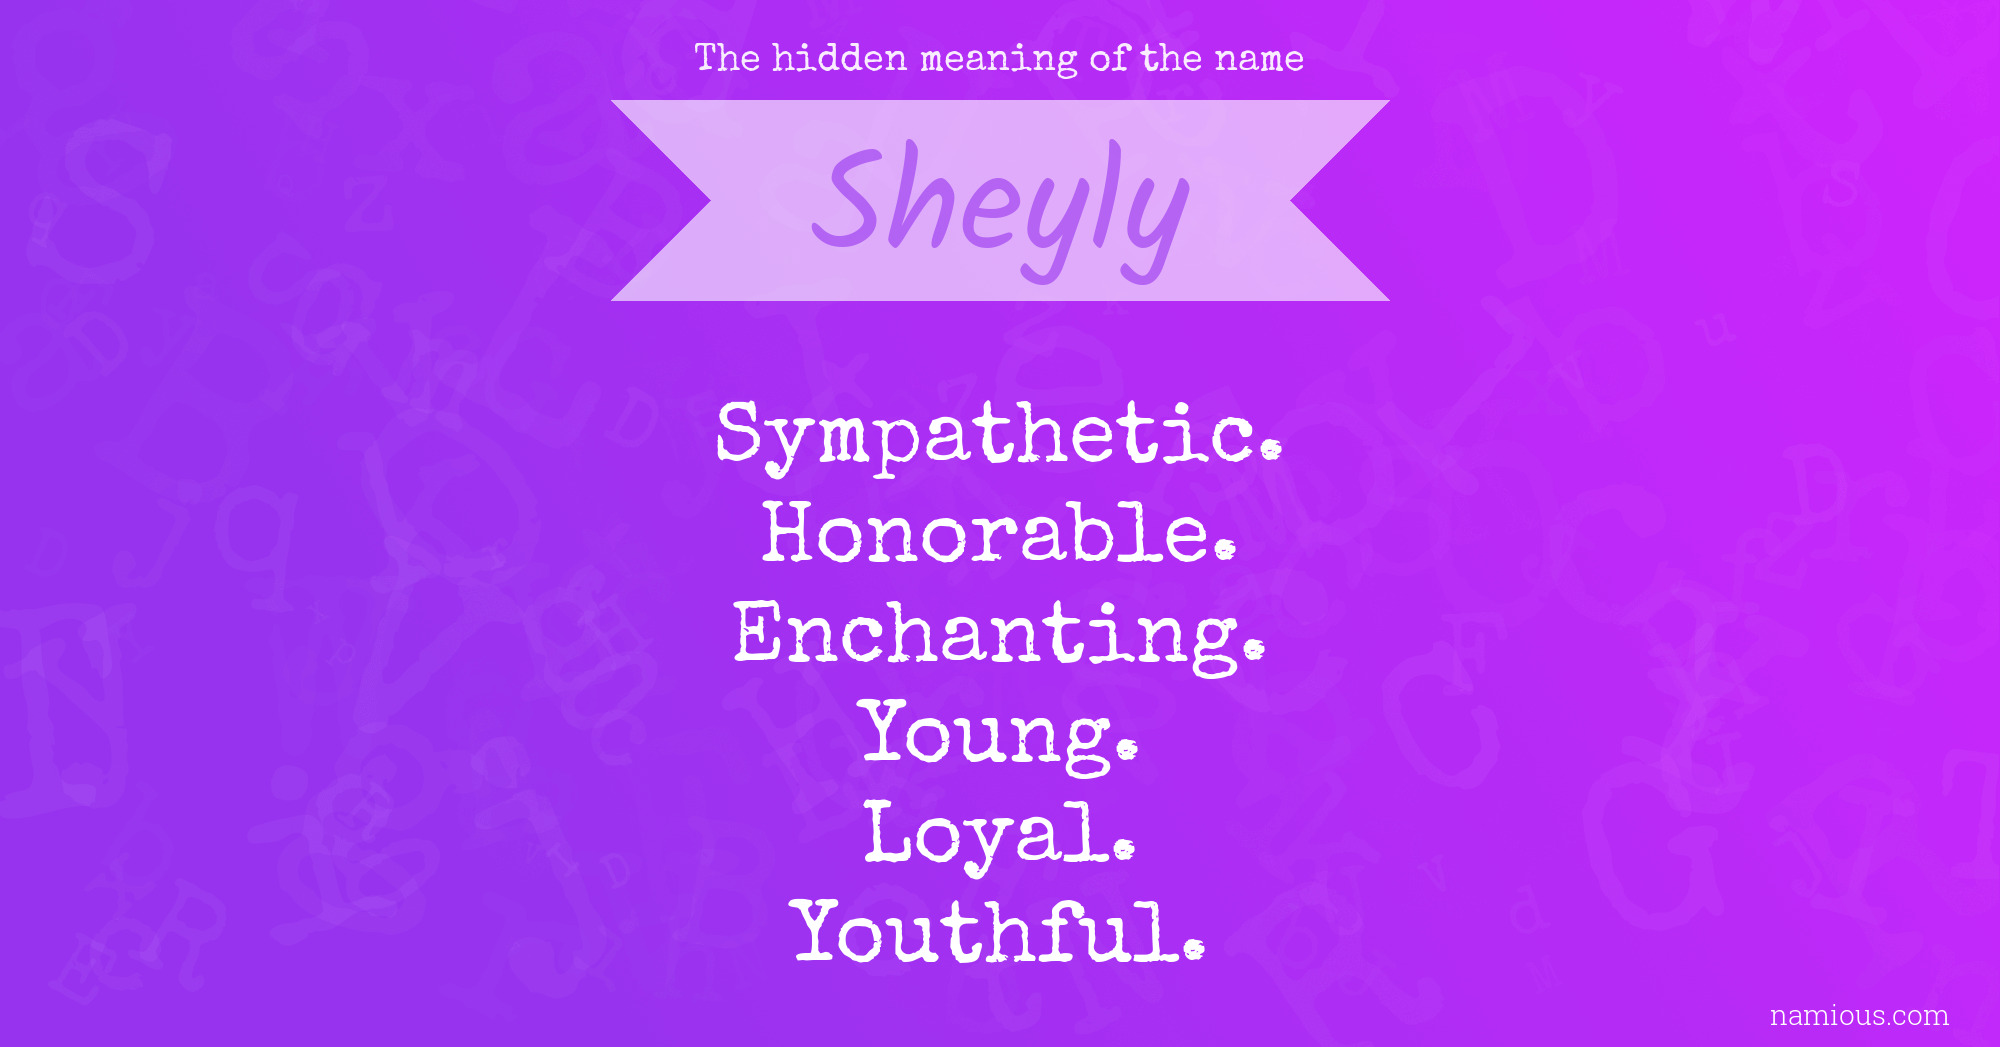 The hidden meaning of the name Sheyly